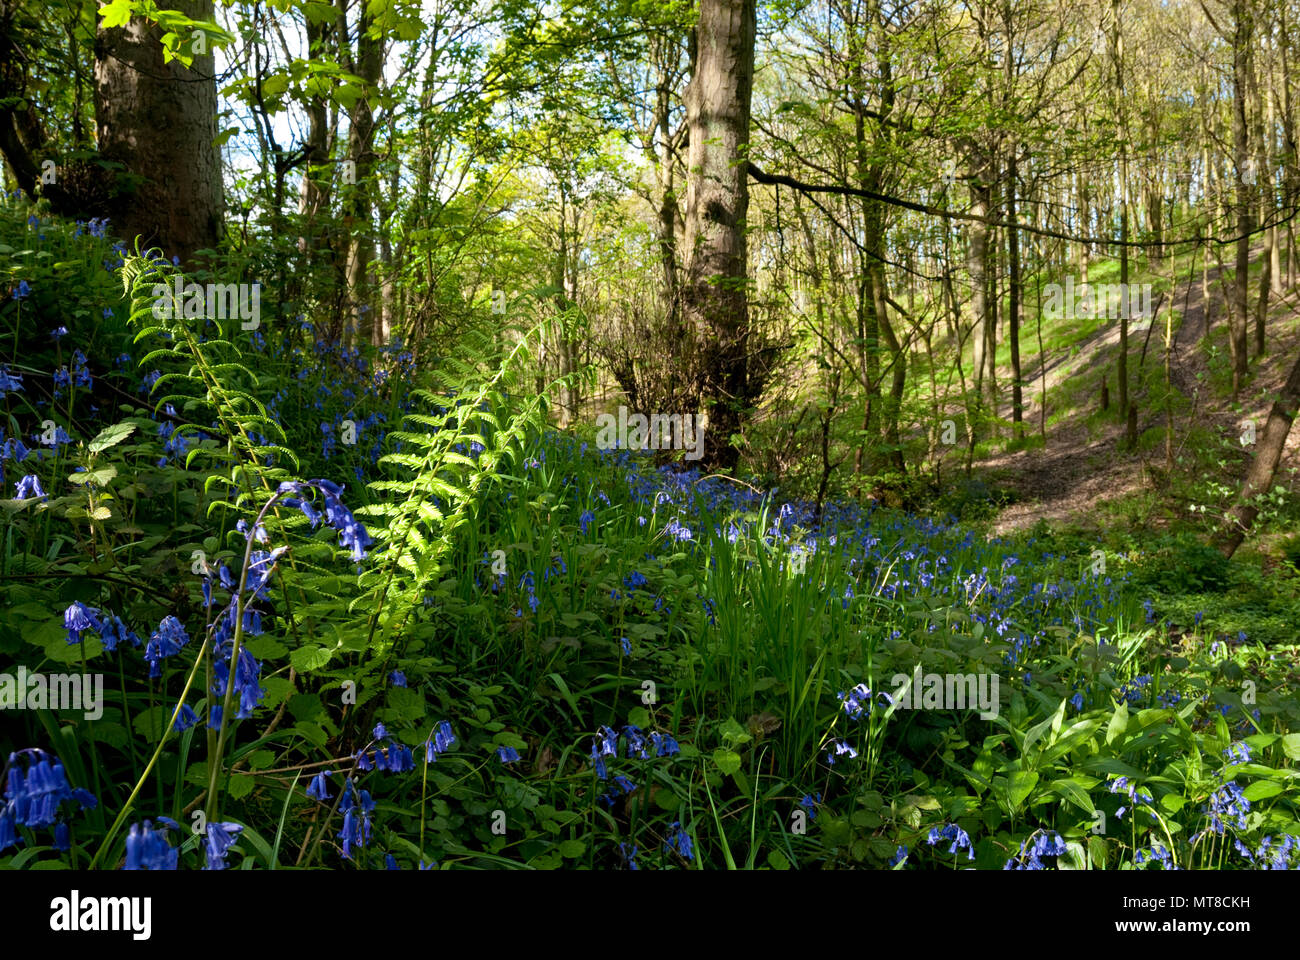 Bluebells grow amid ferns and grasses on the forest floor at Carbrook Ravine nature reserve, Sheffield Wildlife Trust, UK Stock Photo